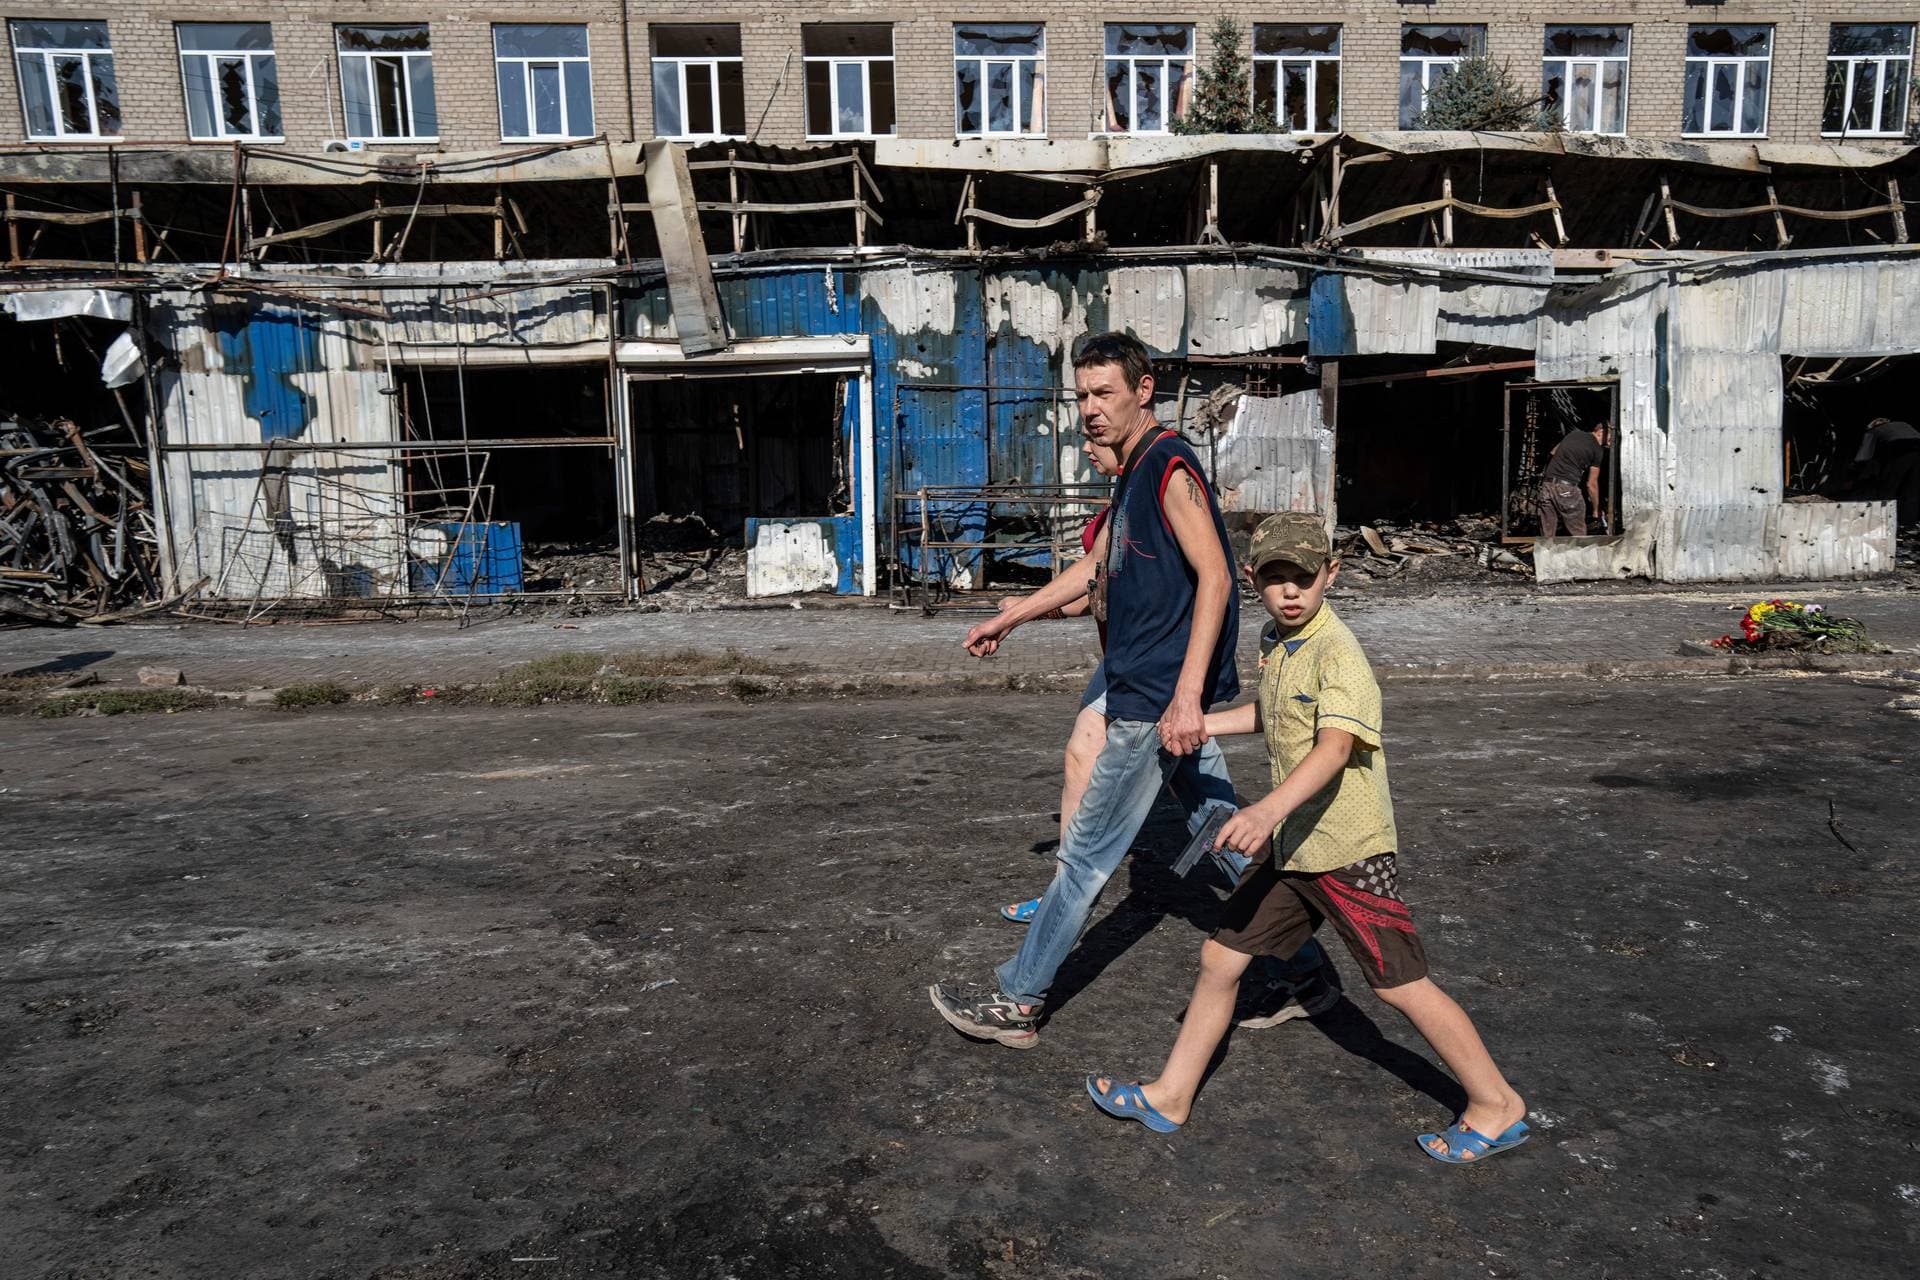 People walk past a destroyed market after yesterday’s rocket attack in the city center of Kostiantynivka